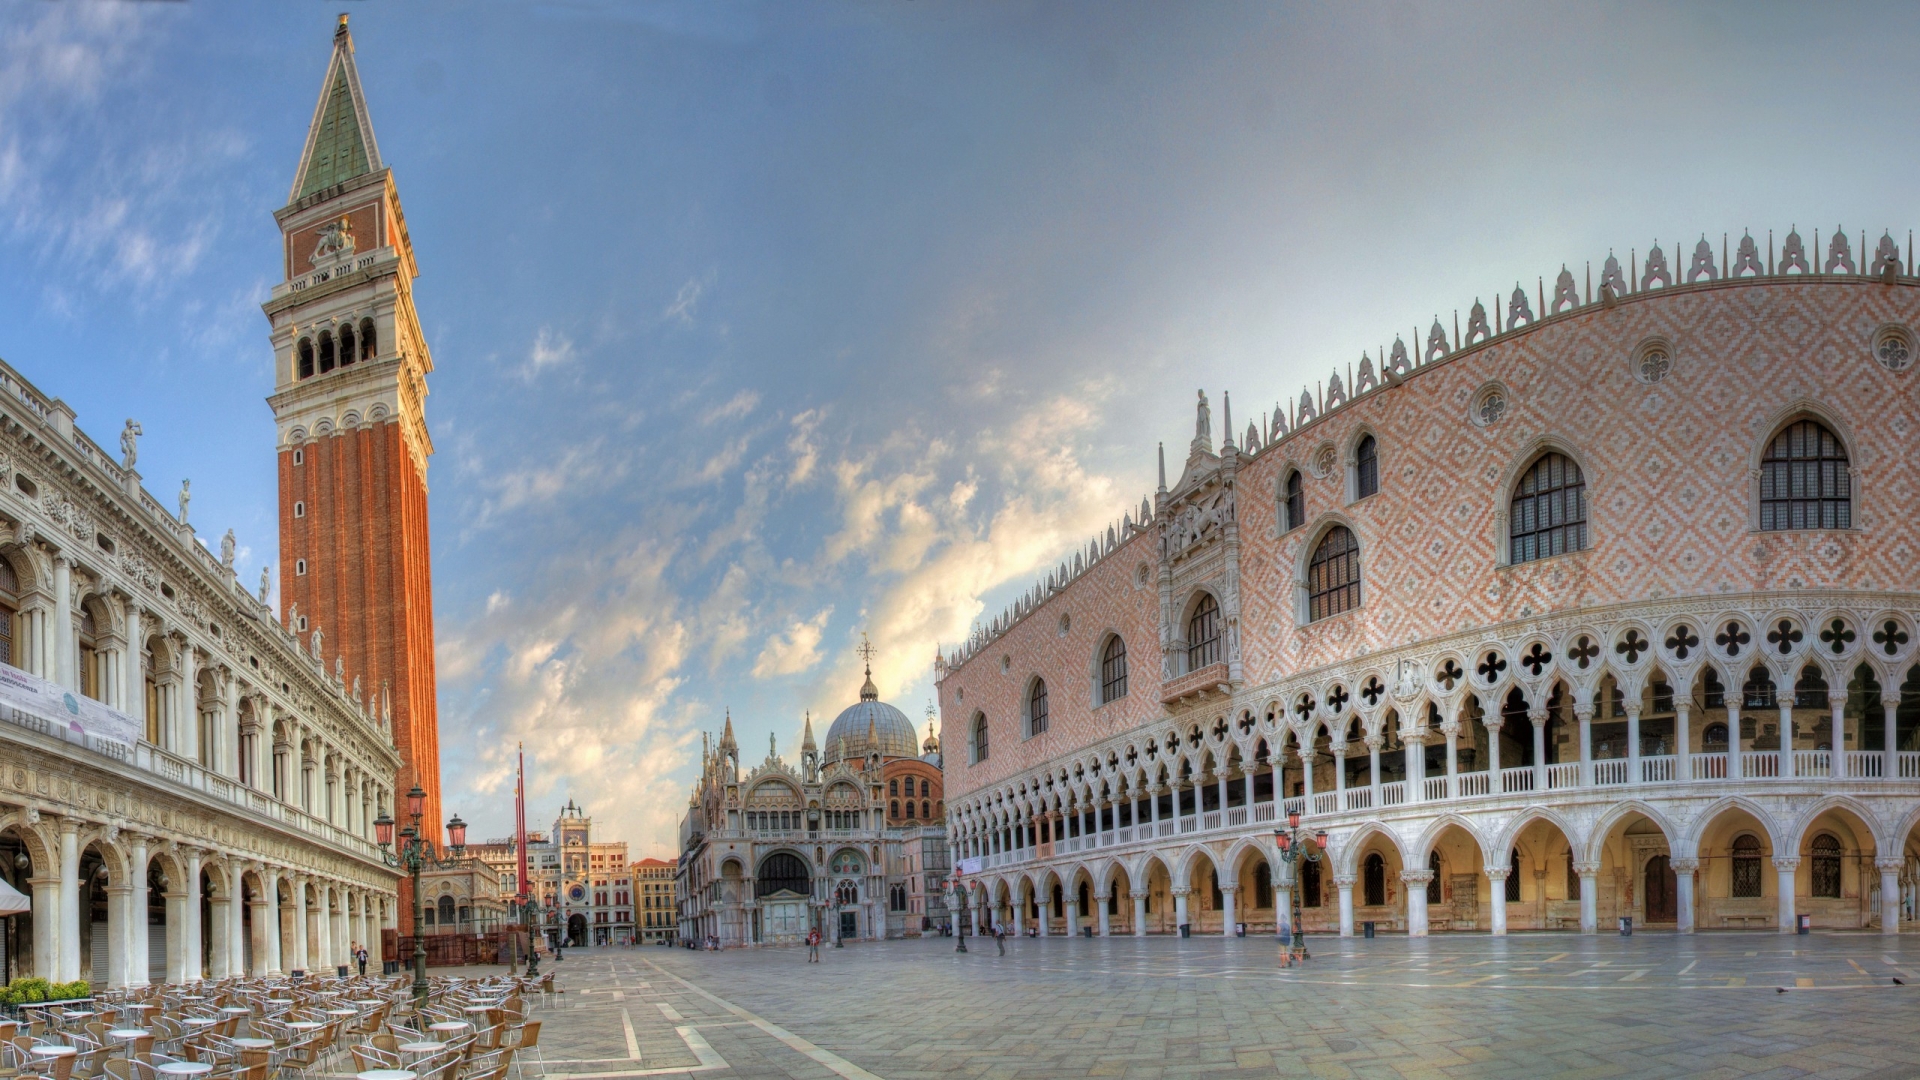 Piazza San Marco in Venice for 1920 x 1080 HDTV 1080p resolution